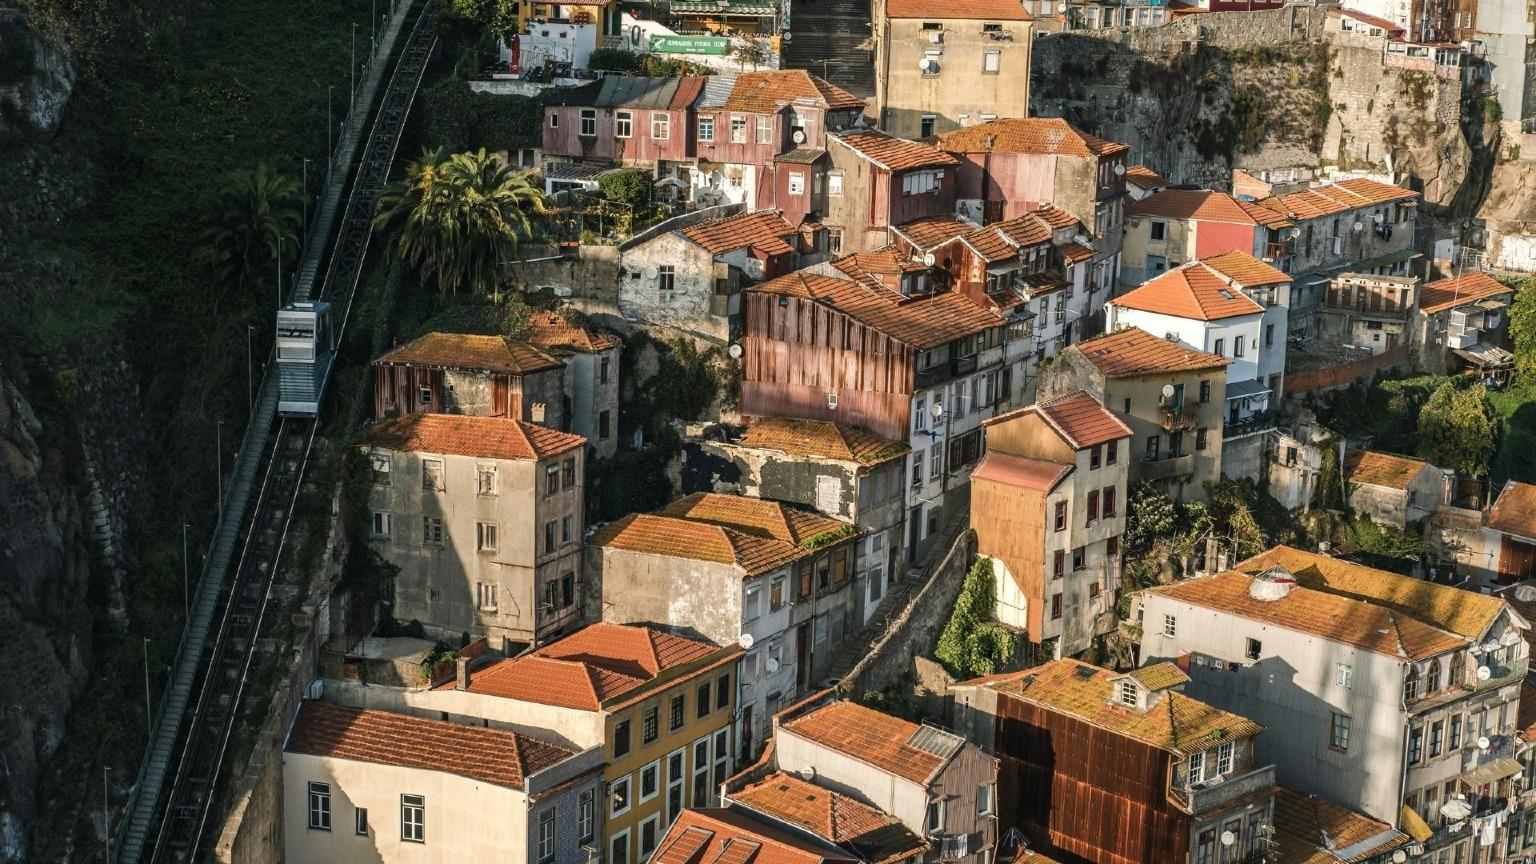 The Funicular dos Guindais ascends from Porto's upper level (Batalha) to the lower level (Ribeira), offering stunning views of the cityscape.